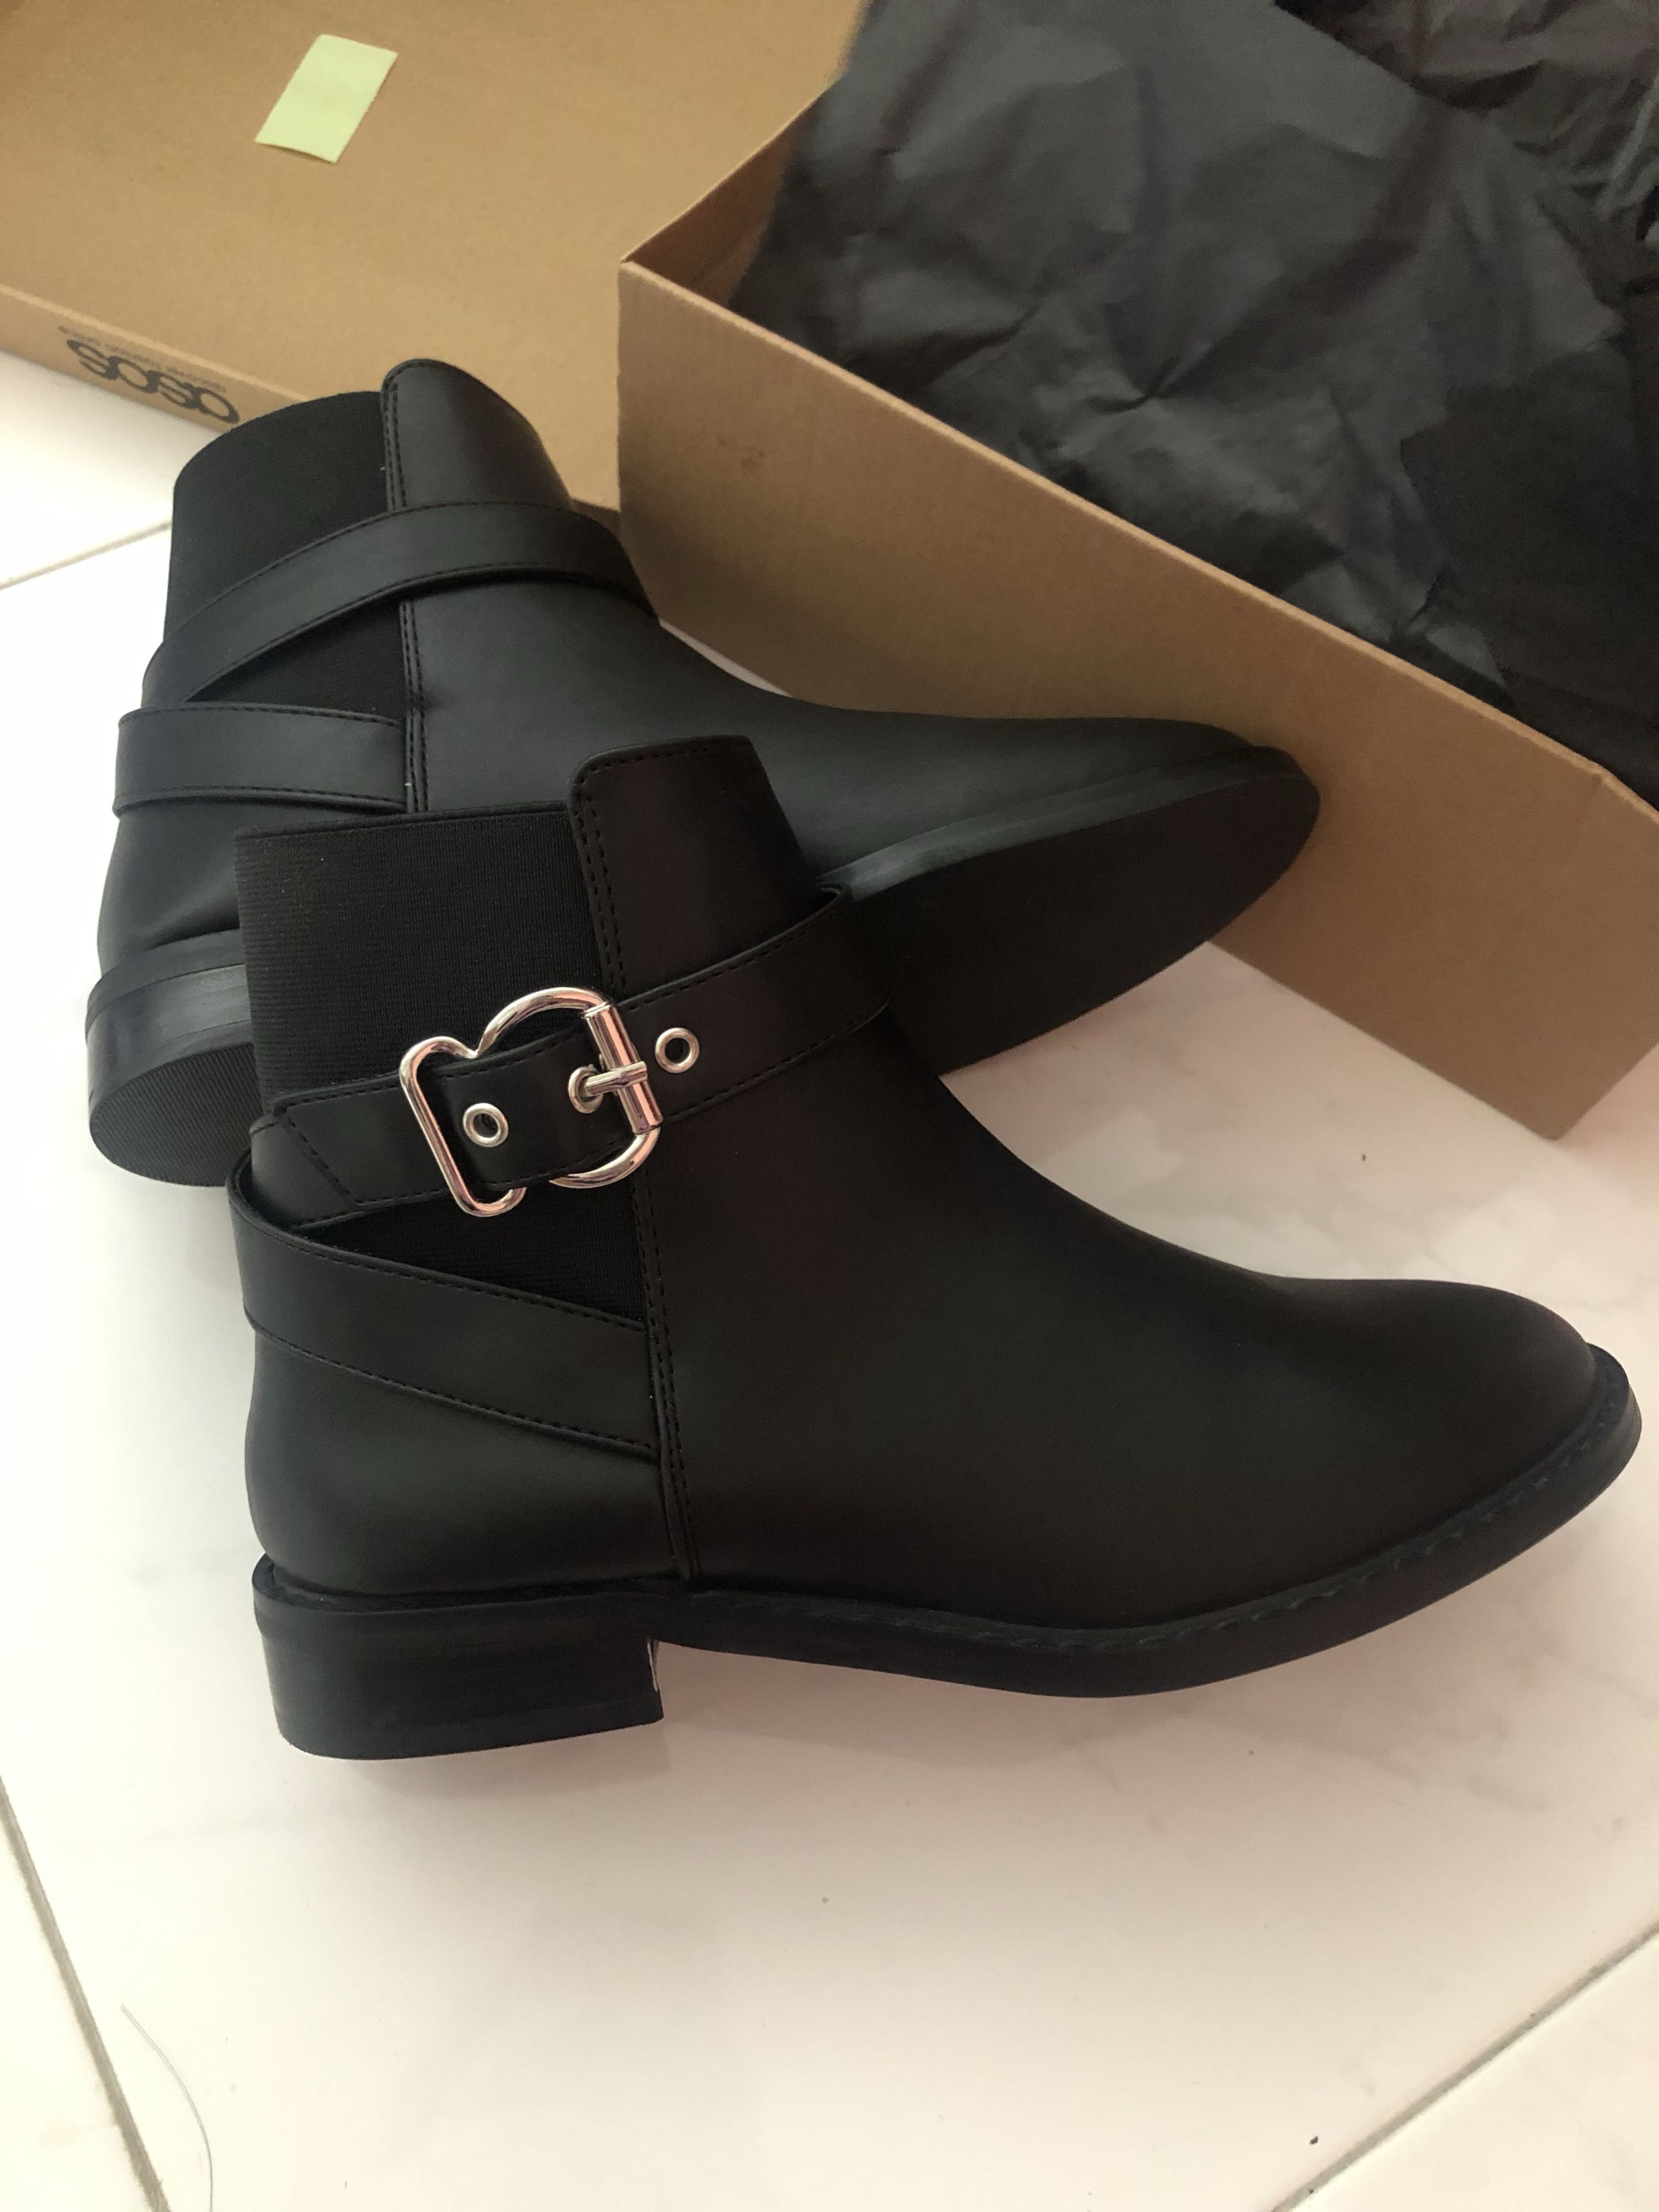 buckle boots asos